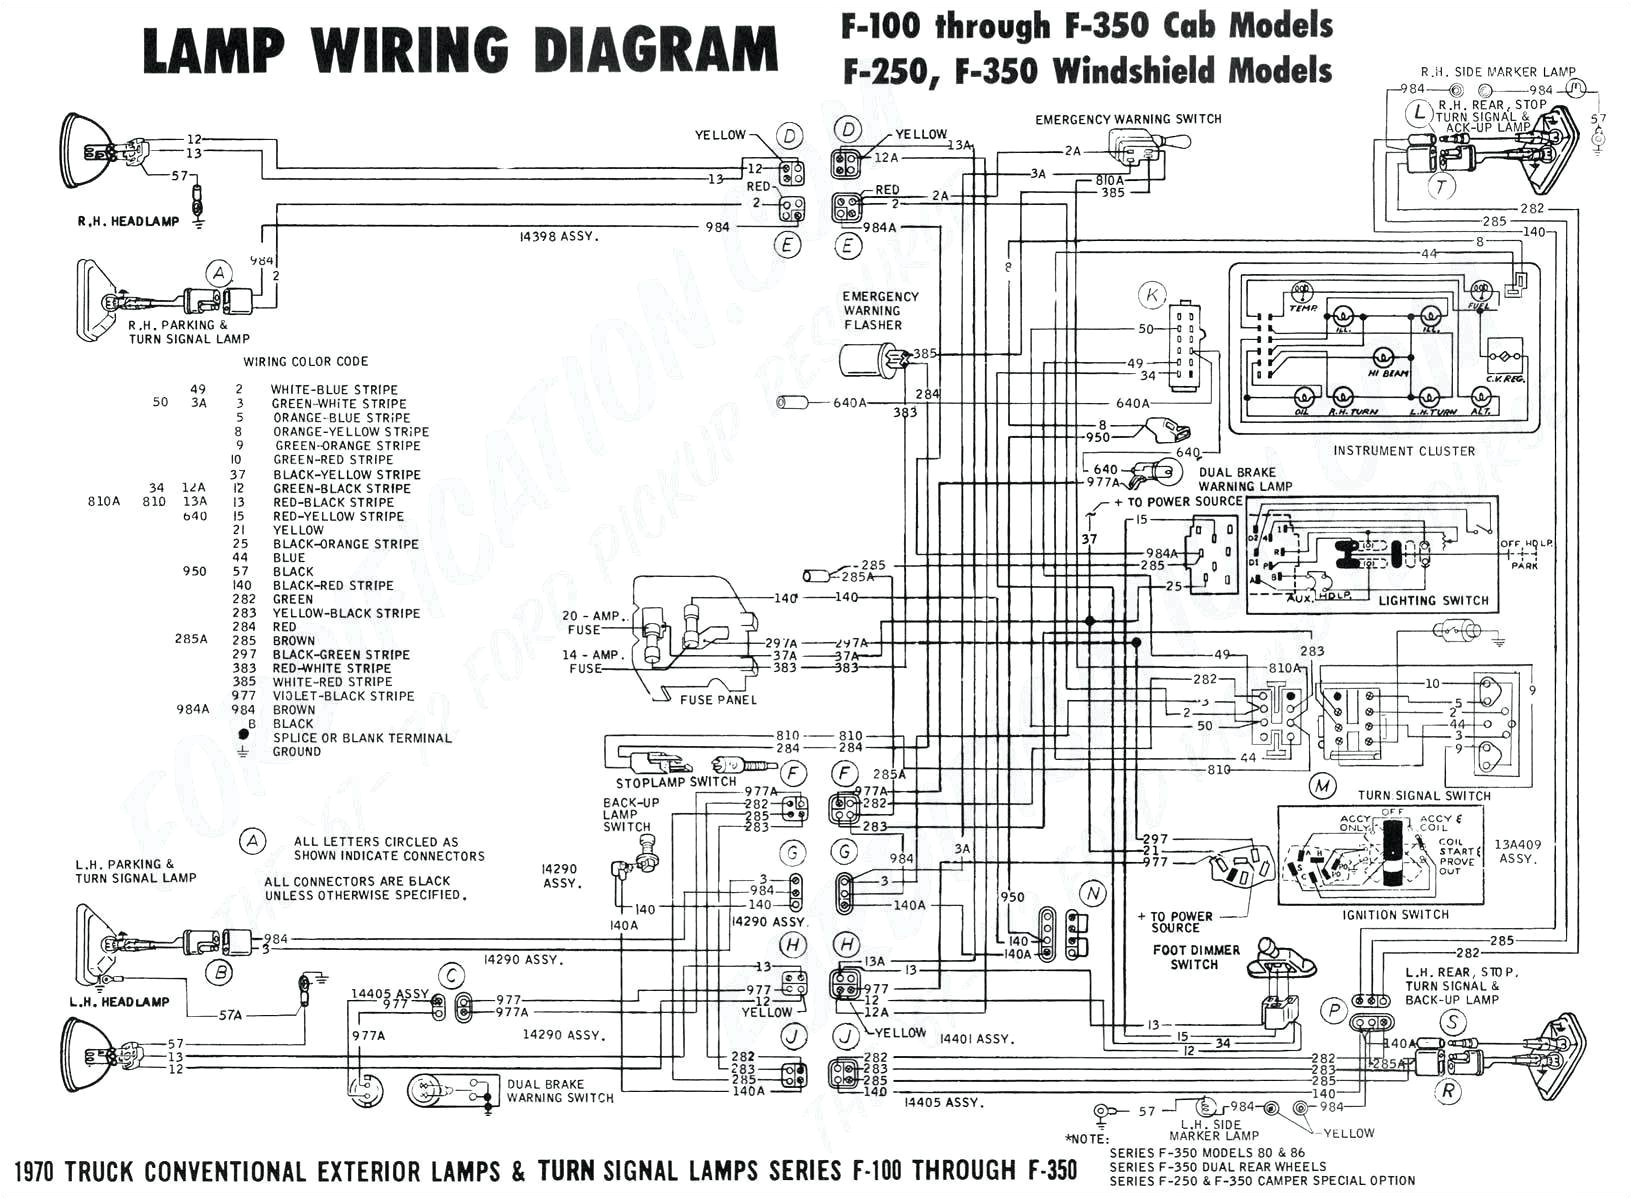 diagram furthermore 1957 chevy fuse panel diagram likewise 1955 wiring diagram furthermore black and white electrical wires likewise